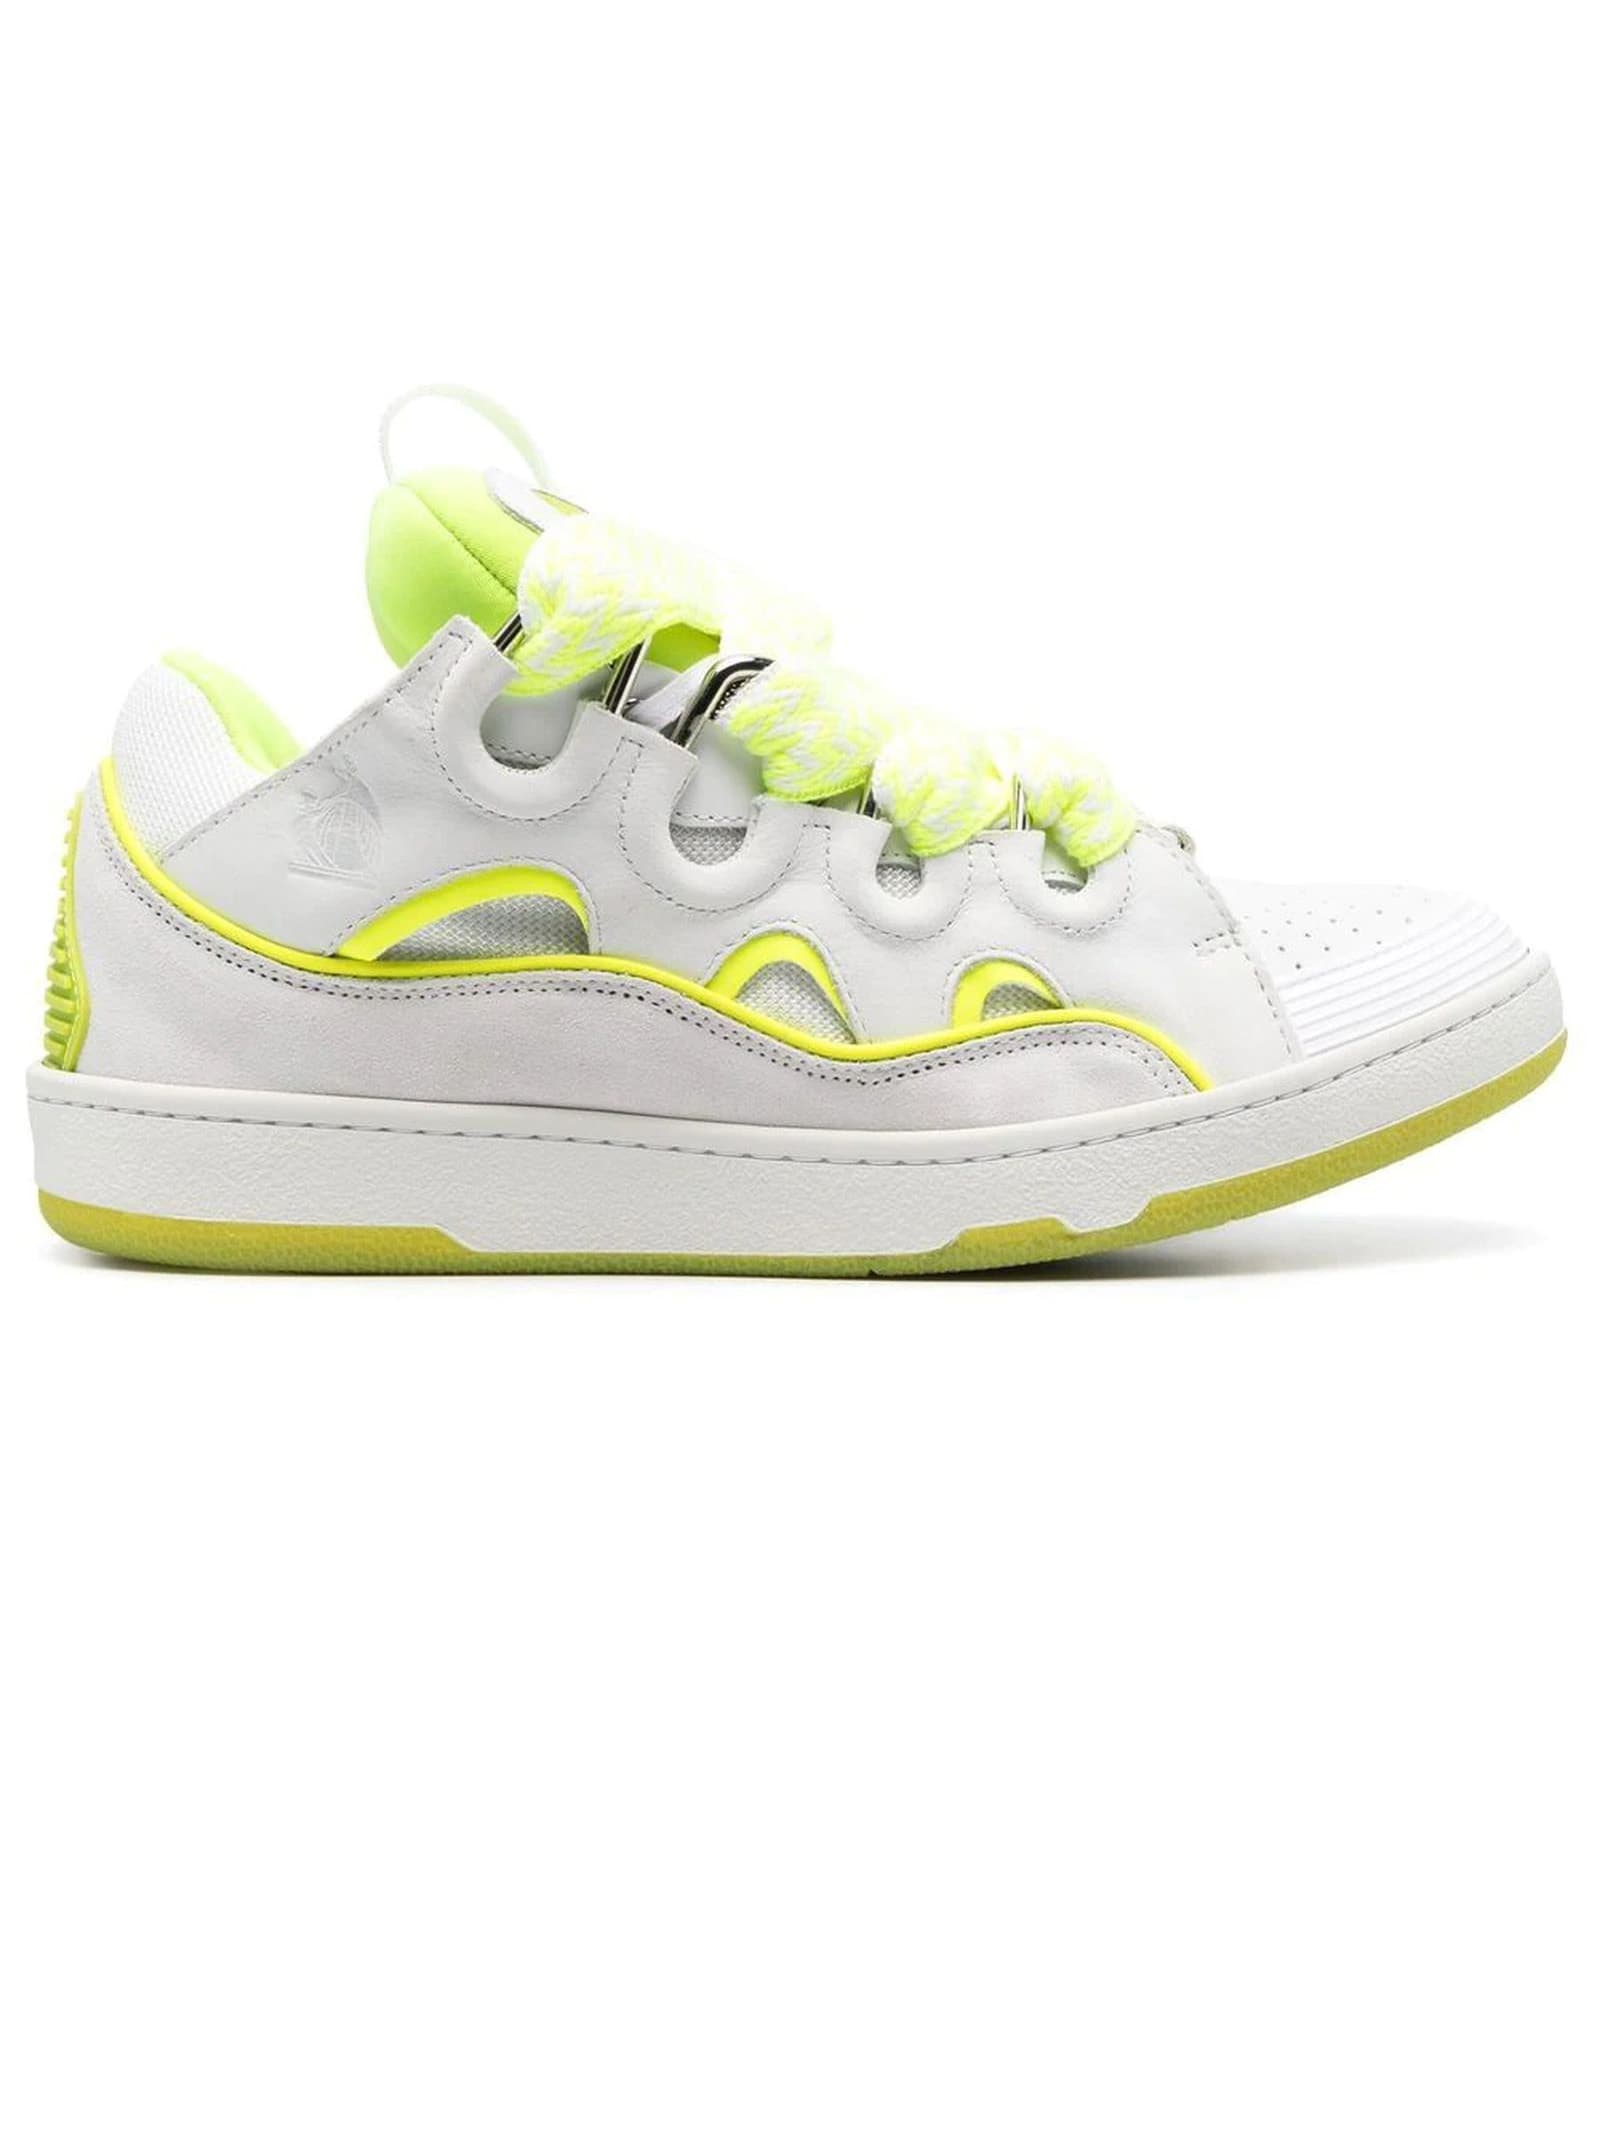 LANVIN CURB SNEAKERS IN WHITE LEATHER